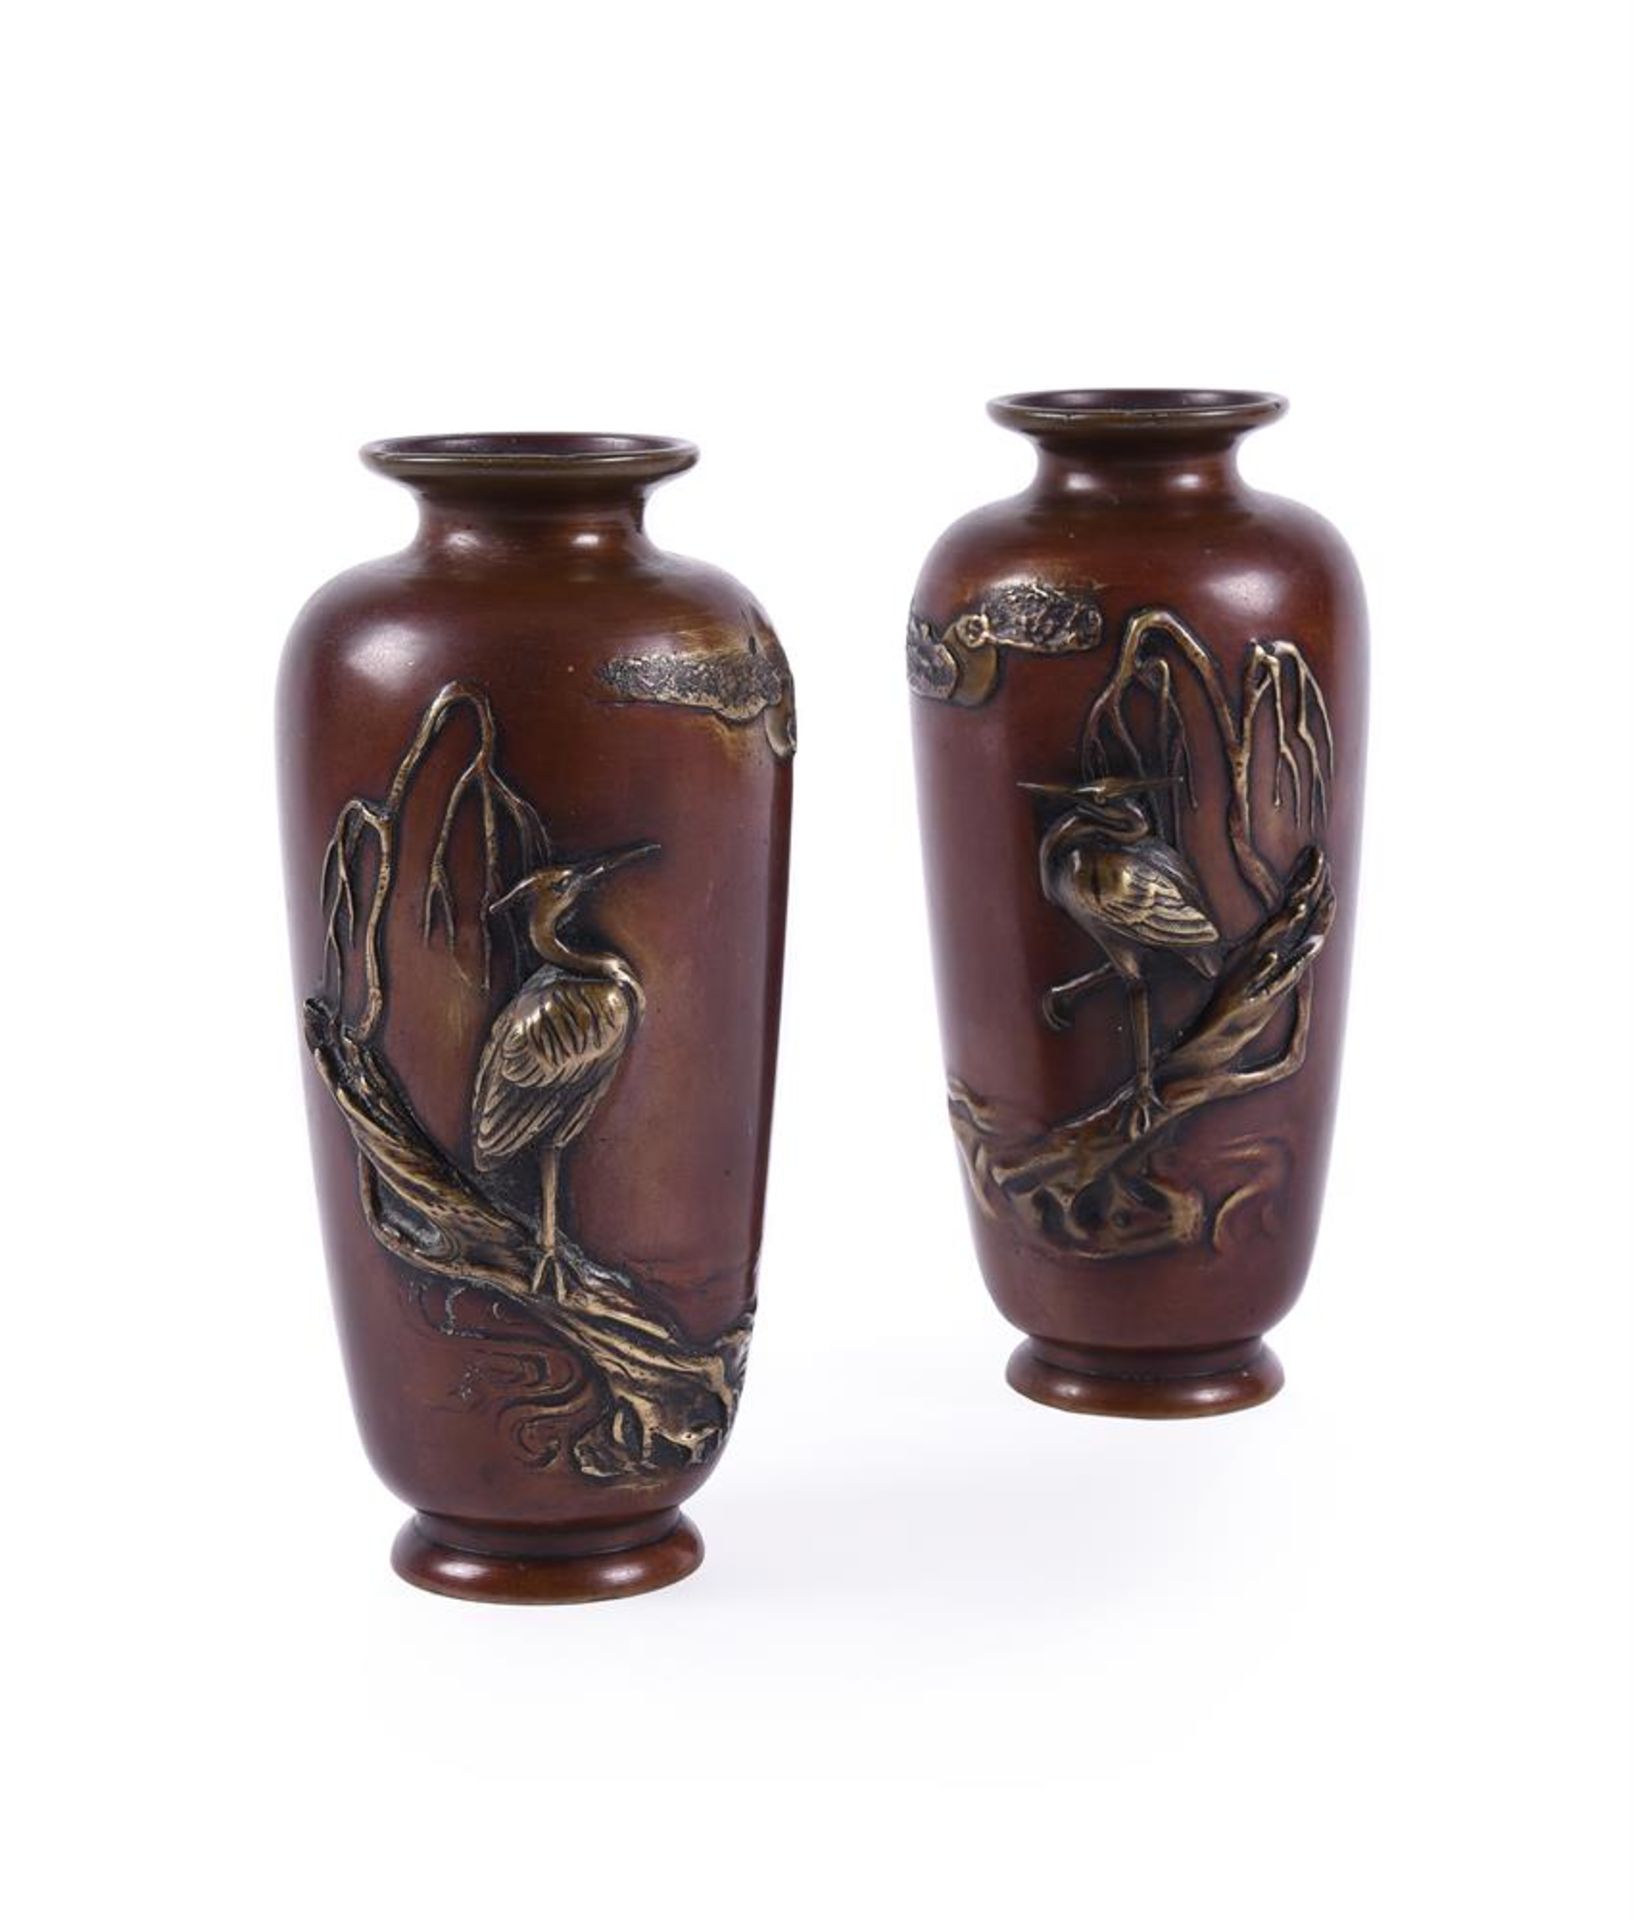 A PAIR OF JAPANESE PATINATED BRONZE VASES